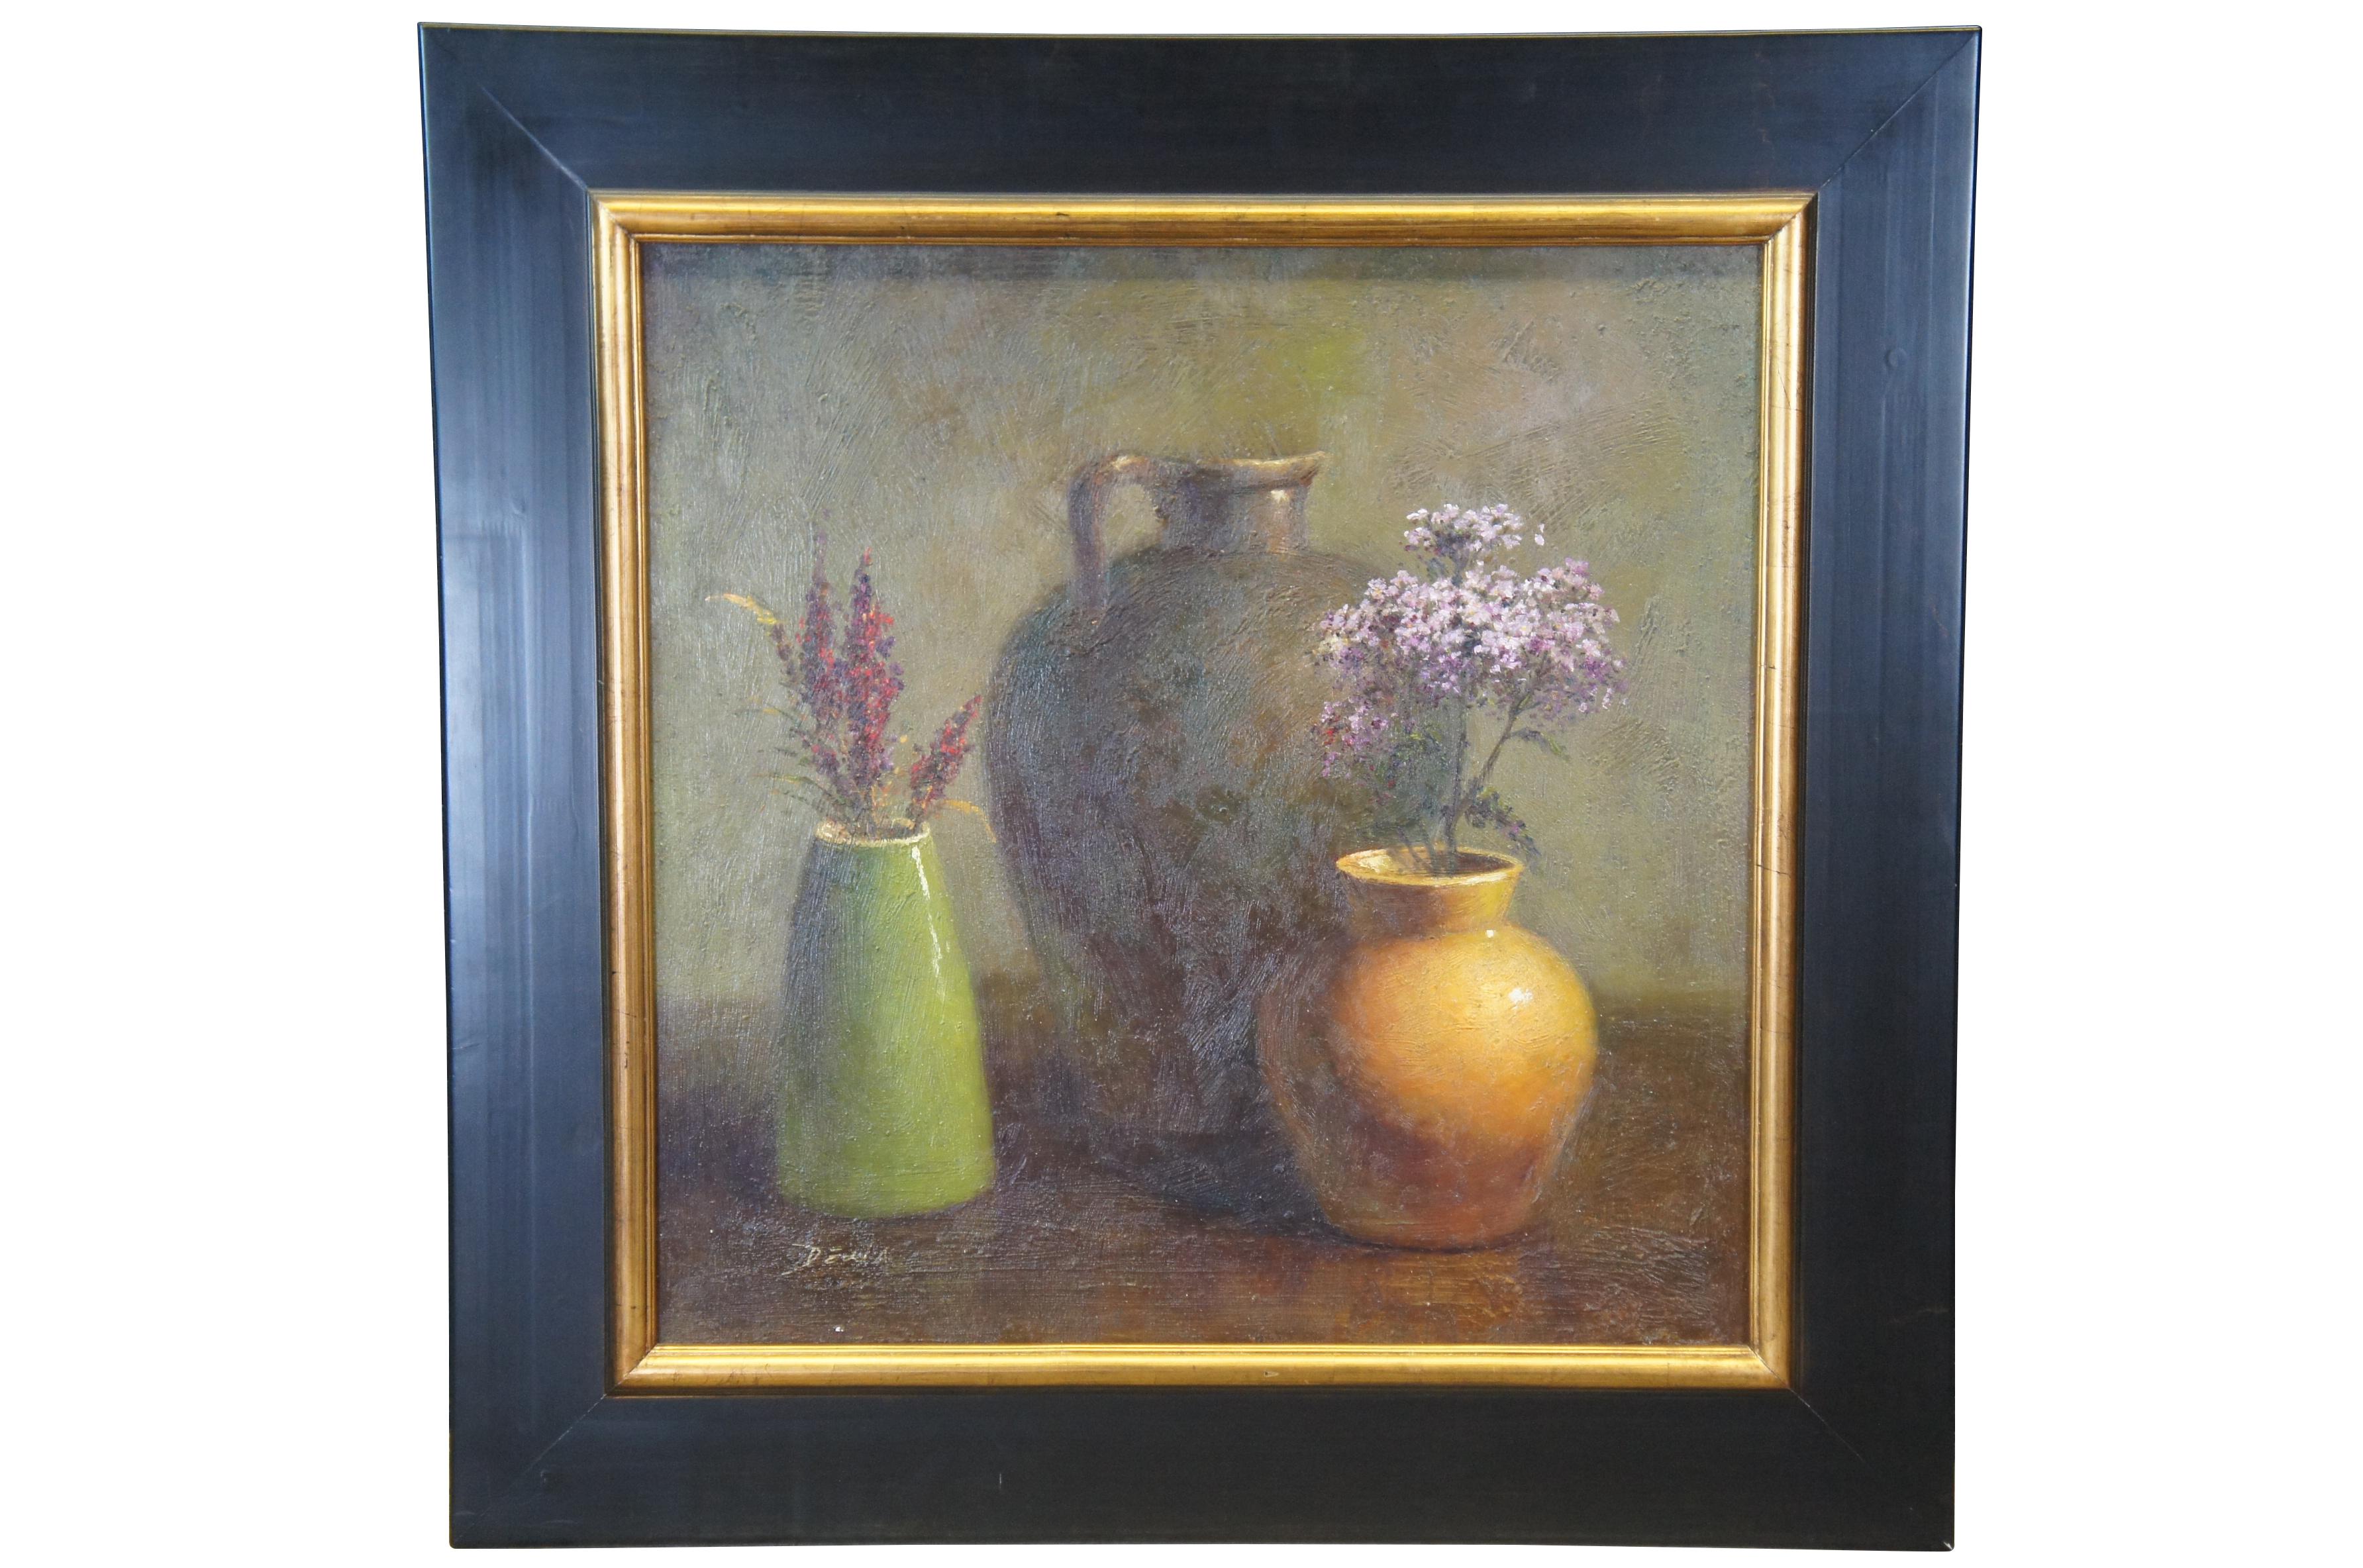 Set of 3 realist oil paintings on canvas, circa 1990s.  Each painting features a southwestern pottery scene with vases and jars. signed by Delia lower left.  The paintings are framed in pine with a dark wood tone and gold trim. Each painting